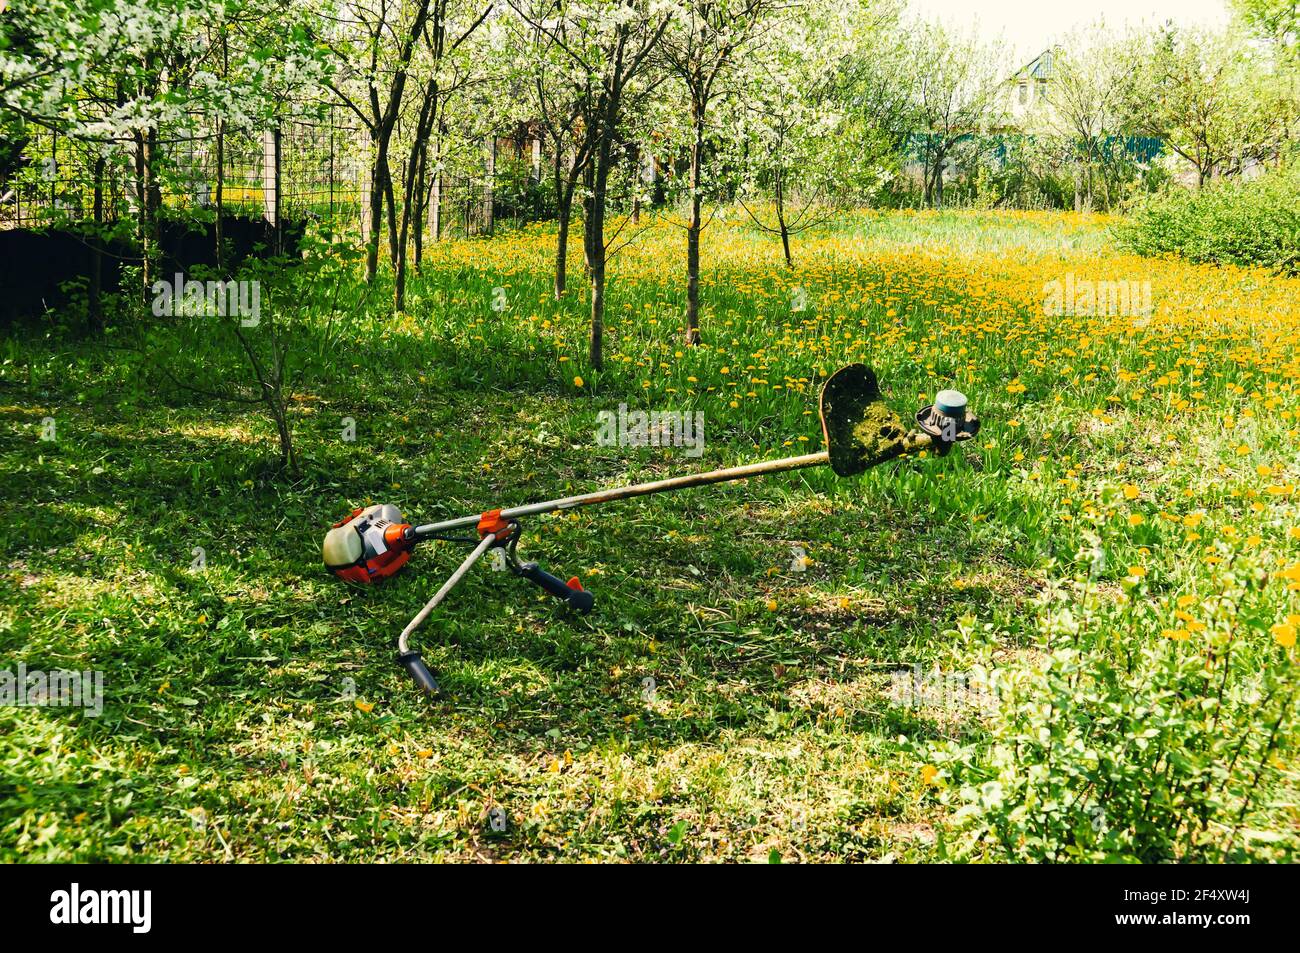 The trimmer is lying on an uncut lawn. Pruning dandelions and other weeds in the yard. an overgrown backyard clearing with a brushcutter. the concept Stock Photo